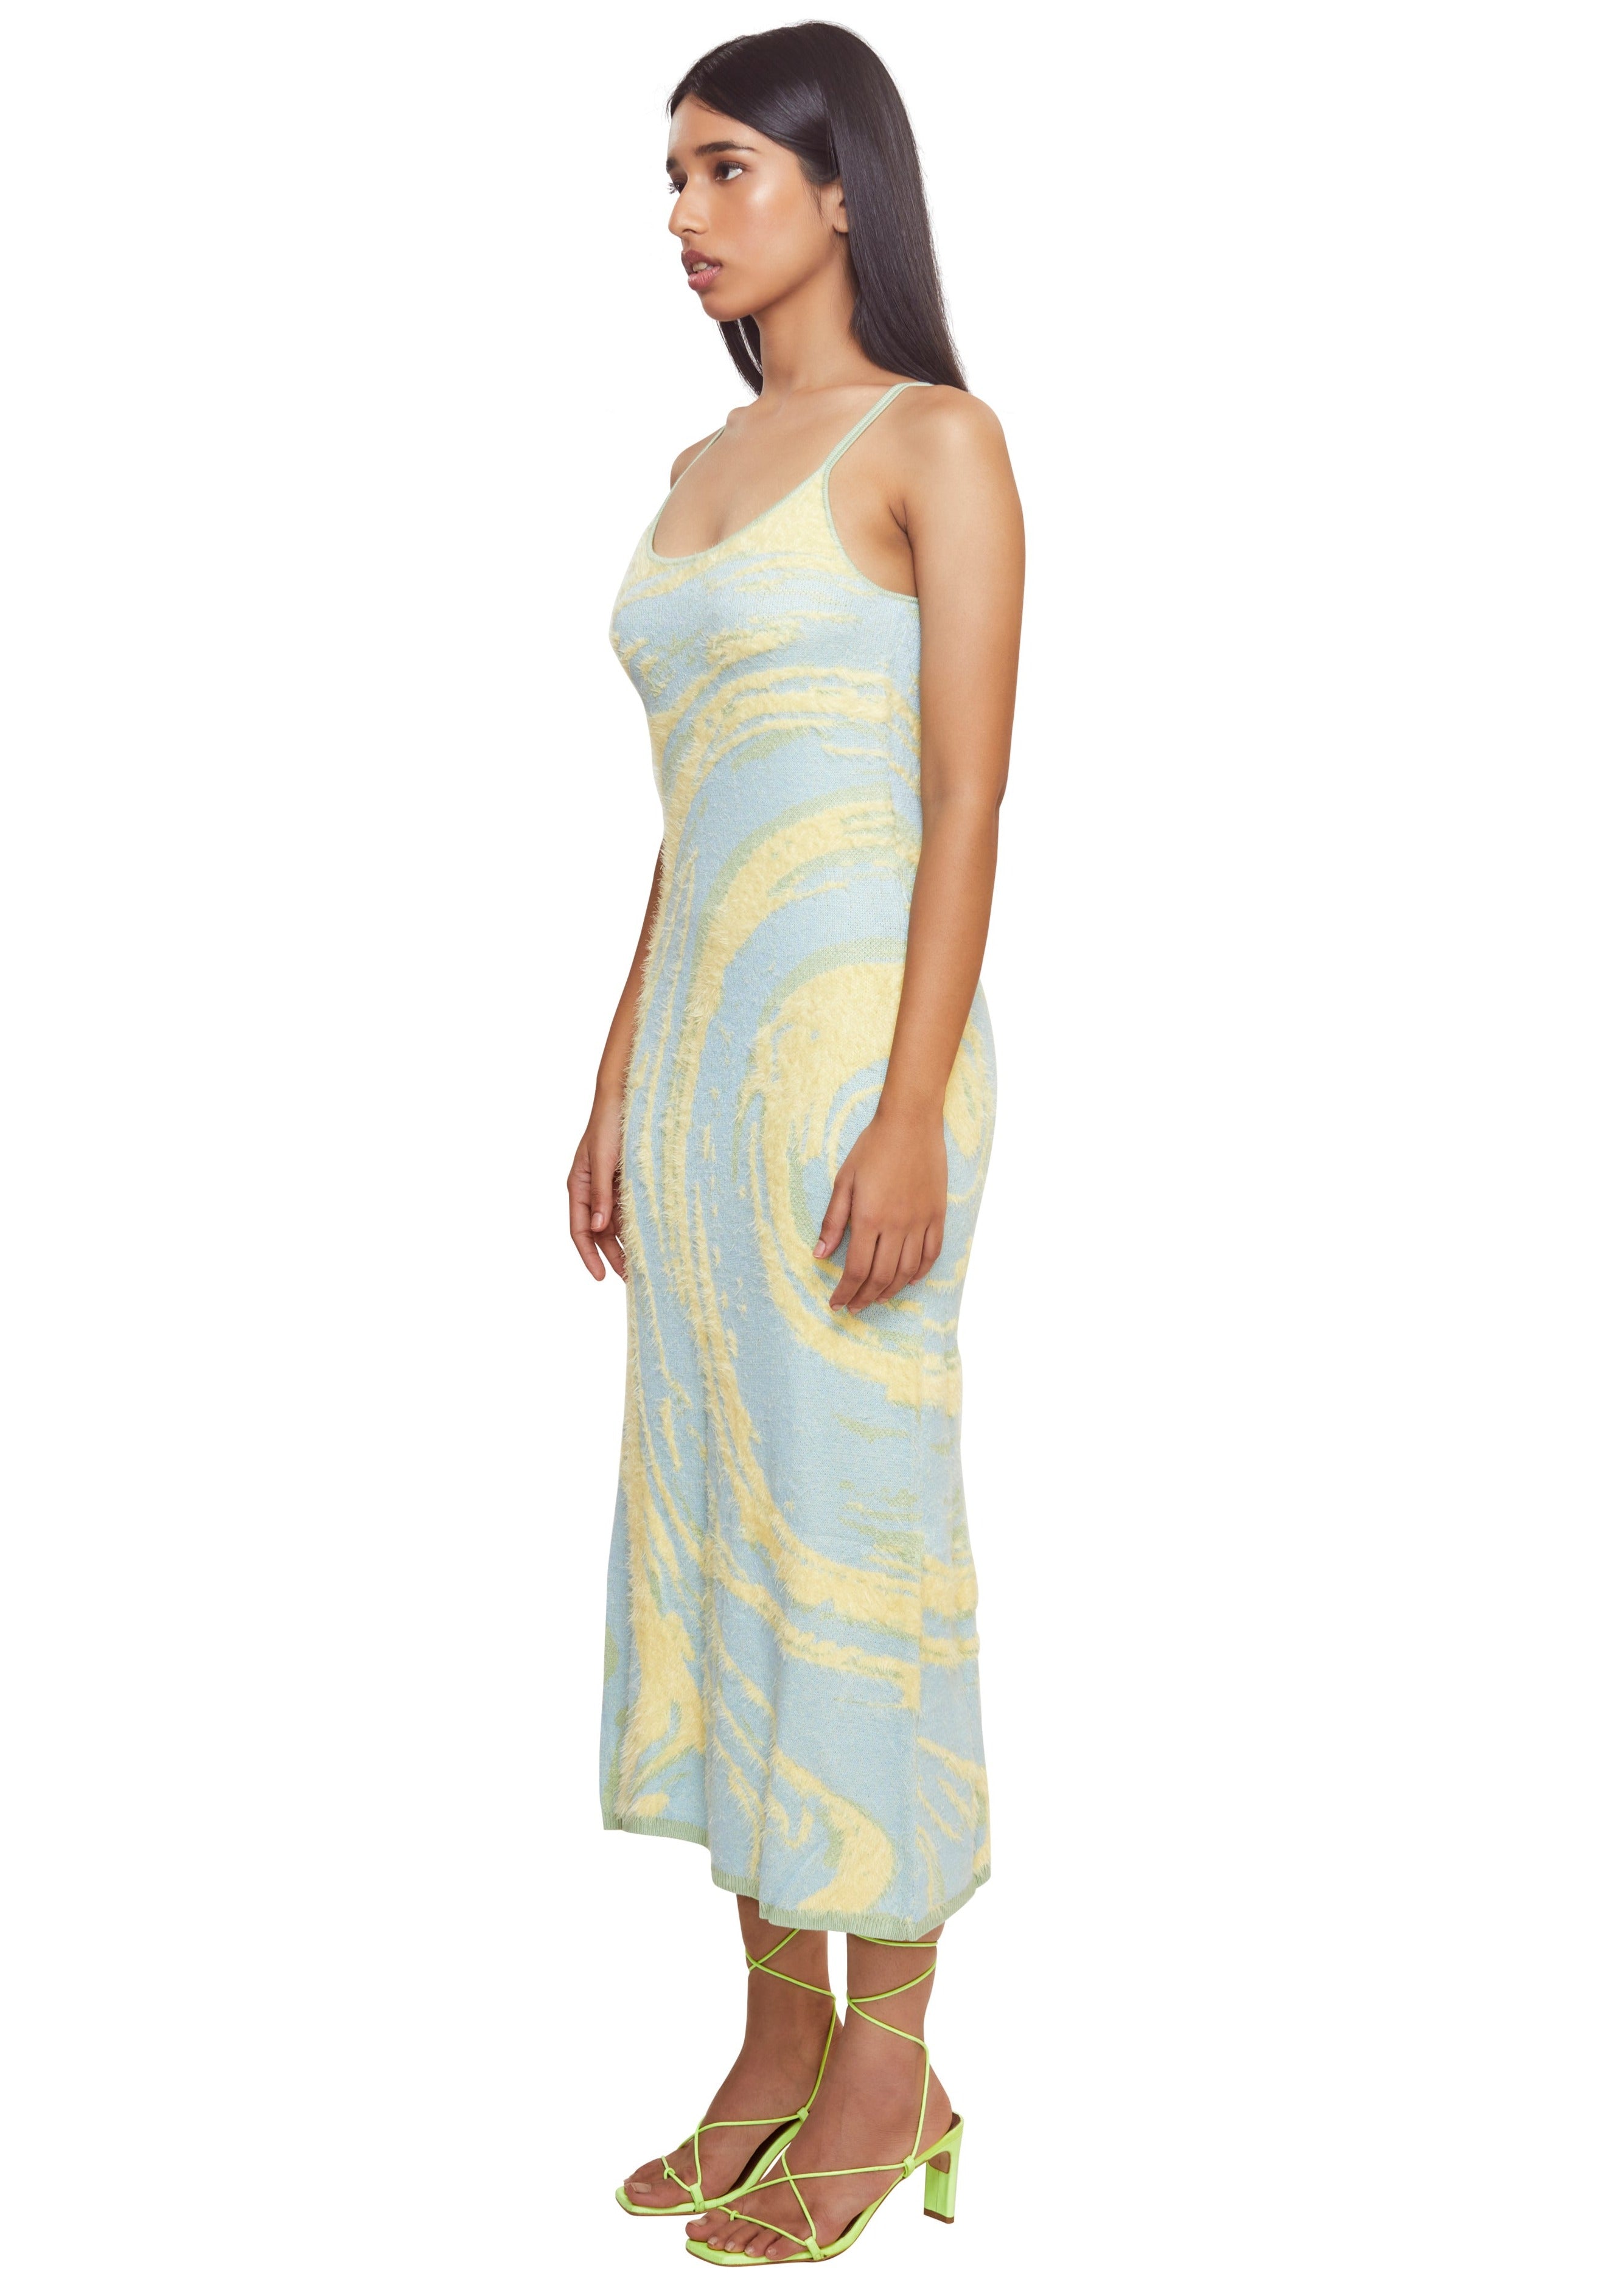 Blue and yellow clasic super soft knitted hofs slip dress w/ swirl print inspired by a beautiful beach from the brand House Of Sunny